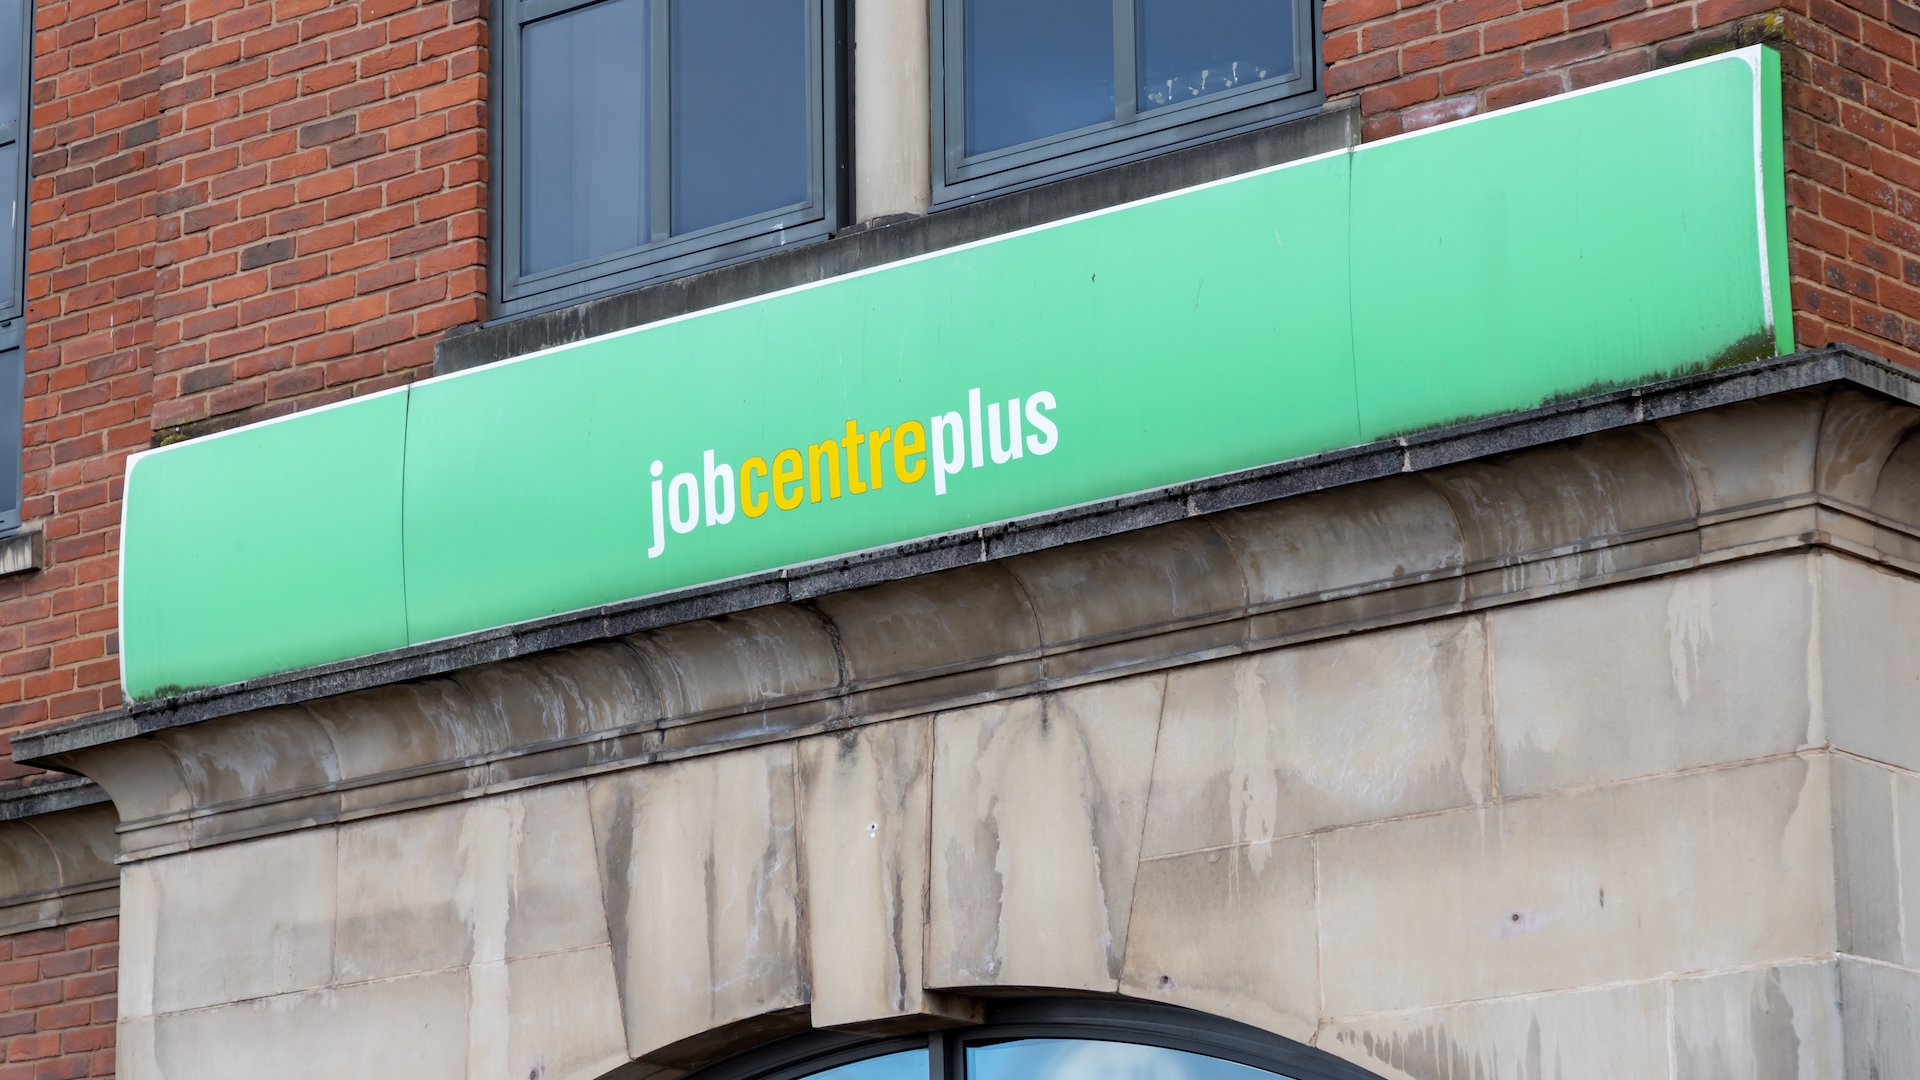 The green job centre plus sign hangs above a wet and dirty concrete architrave